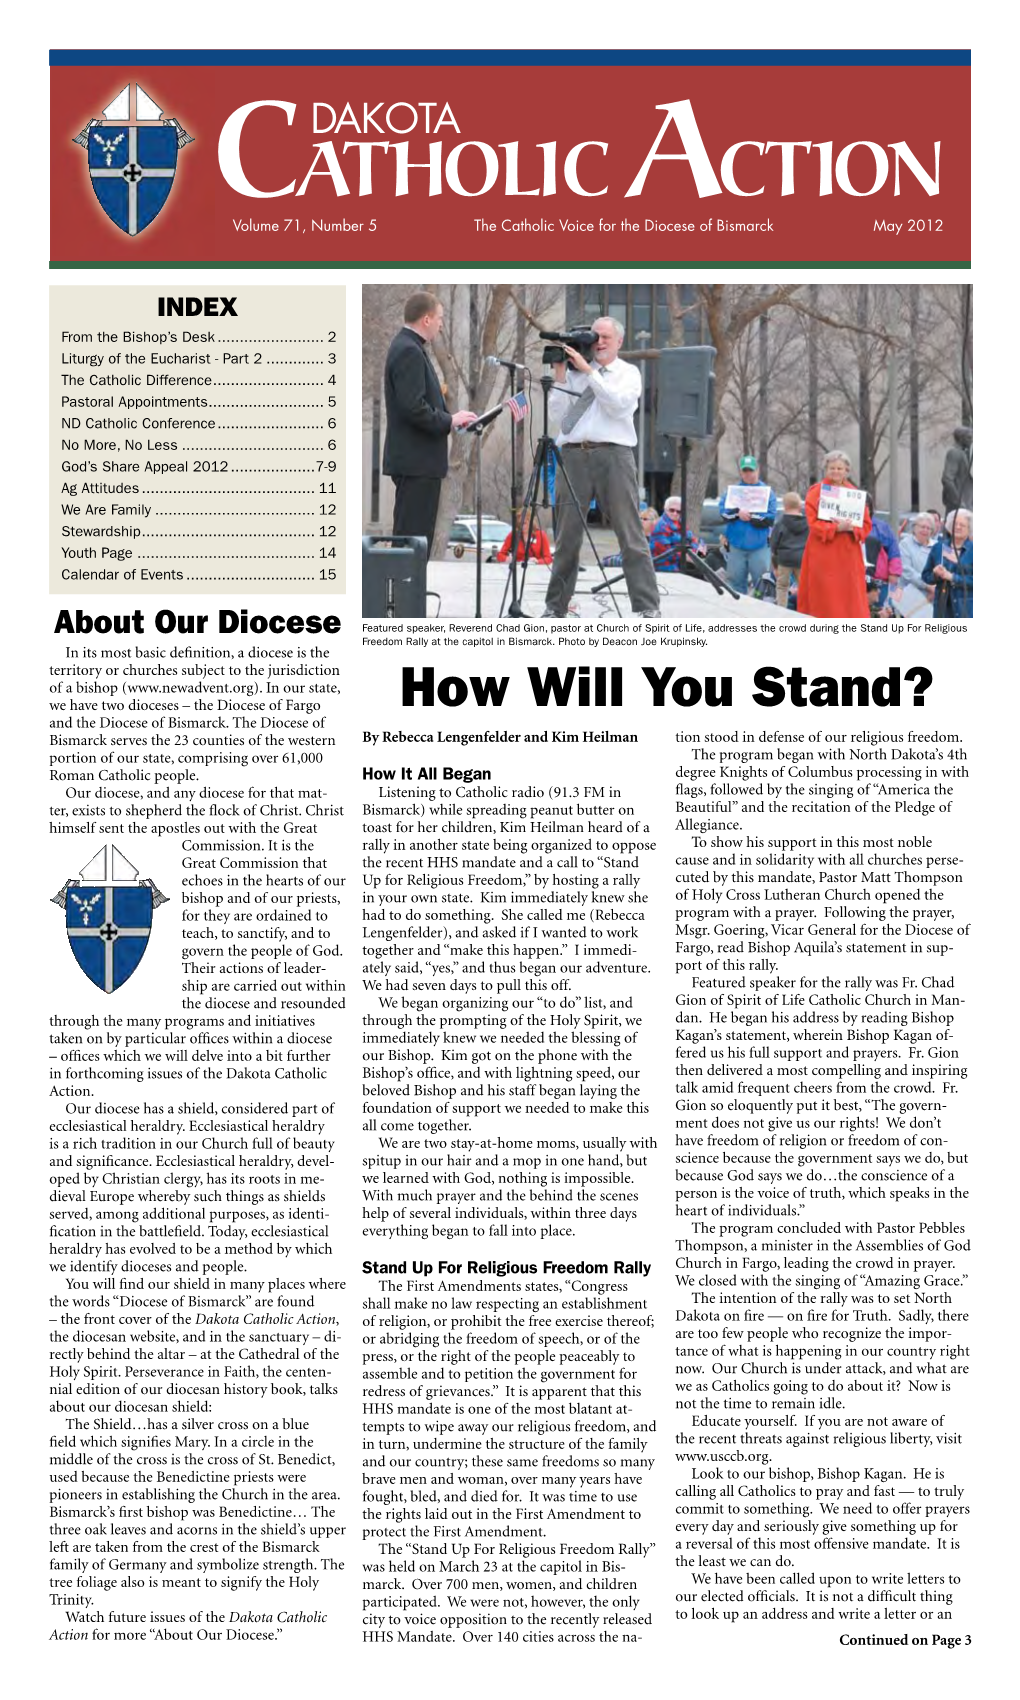 CATHOLIC ACTION Volume 71, Number 5 the Catholic Voice for the Diocese of Bismarck May 2012